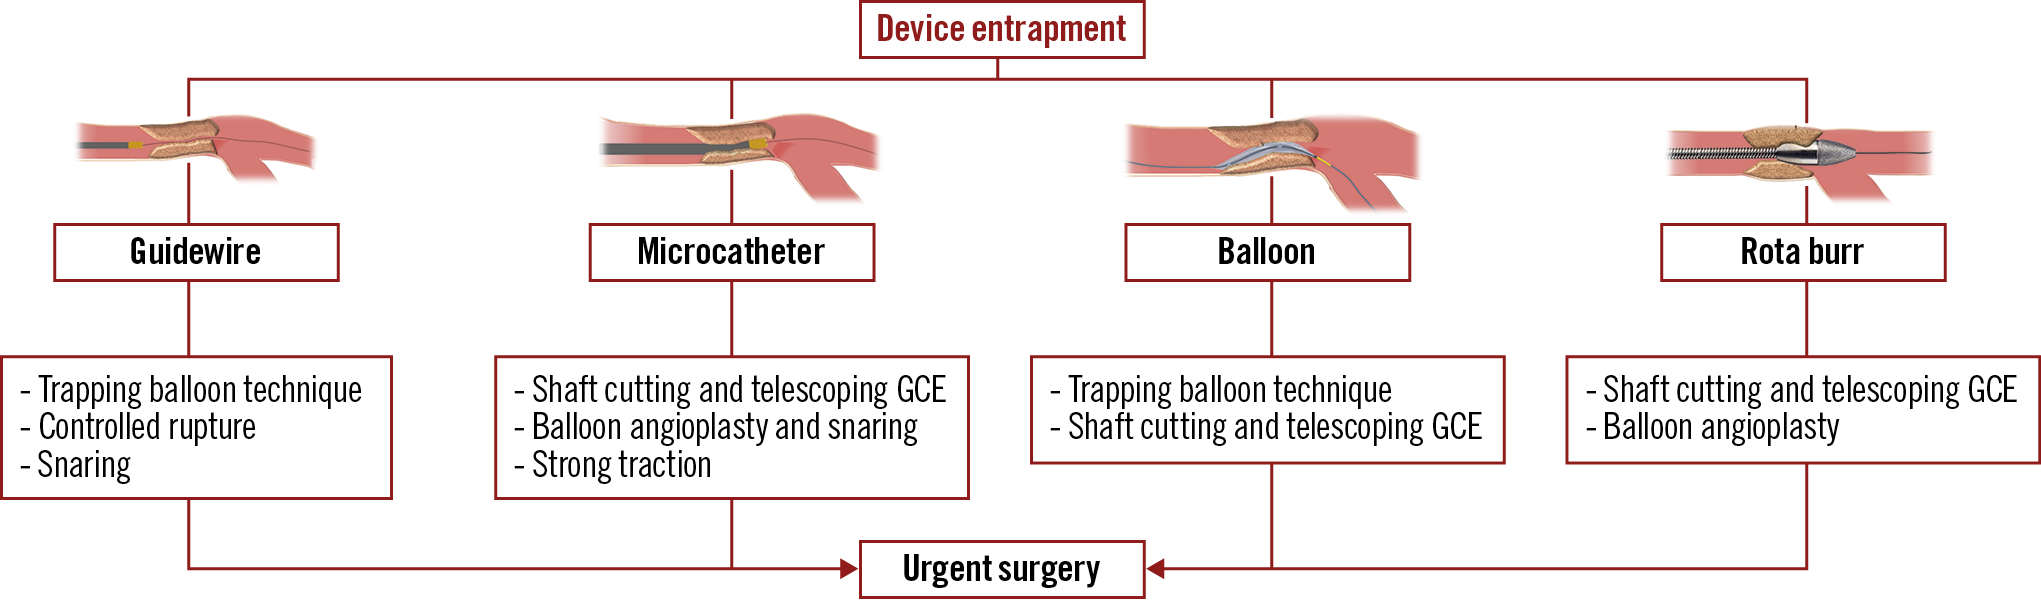 Figure 1. Techniques used for the management of device entrapment. GCE: guide catheter extension